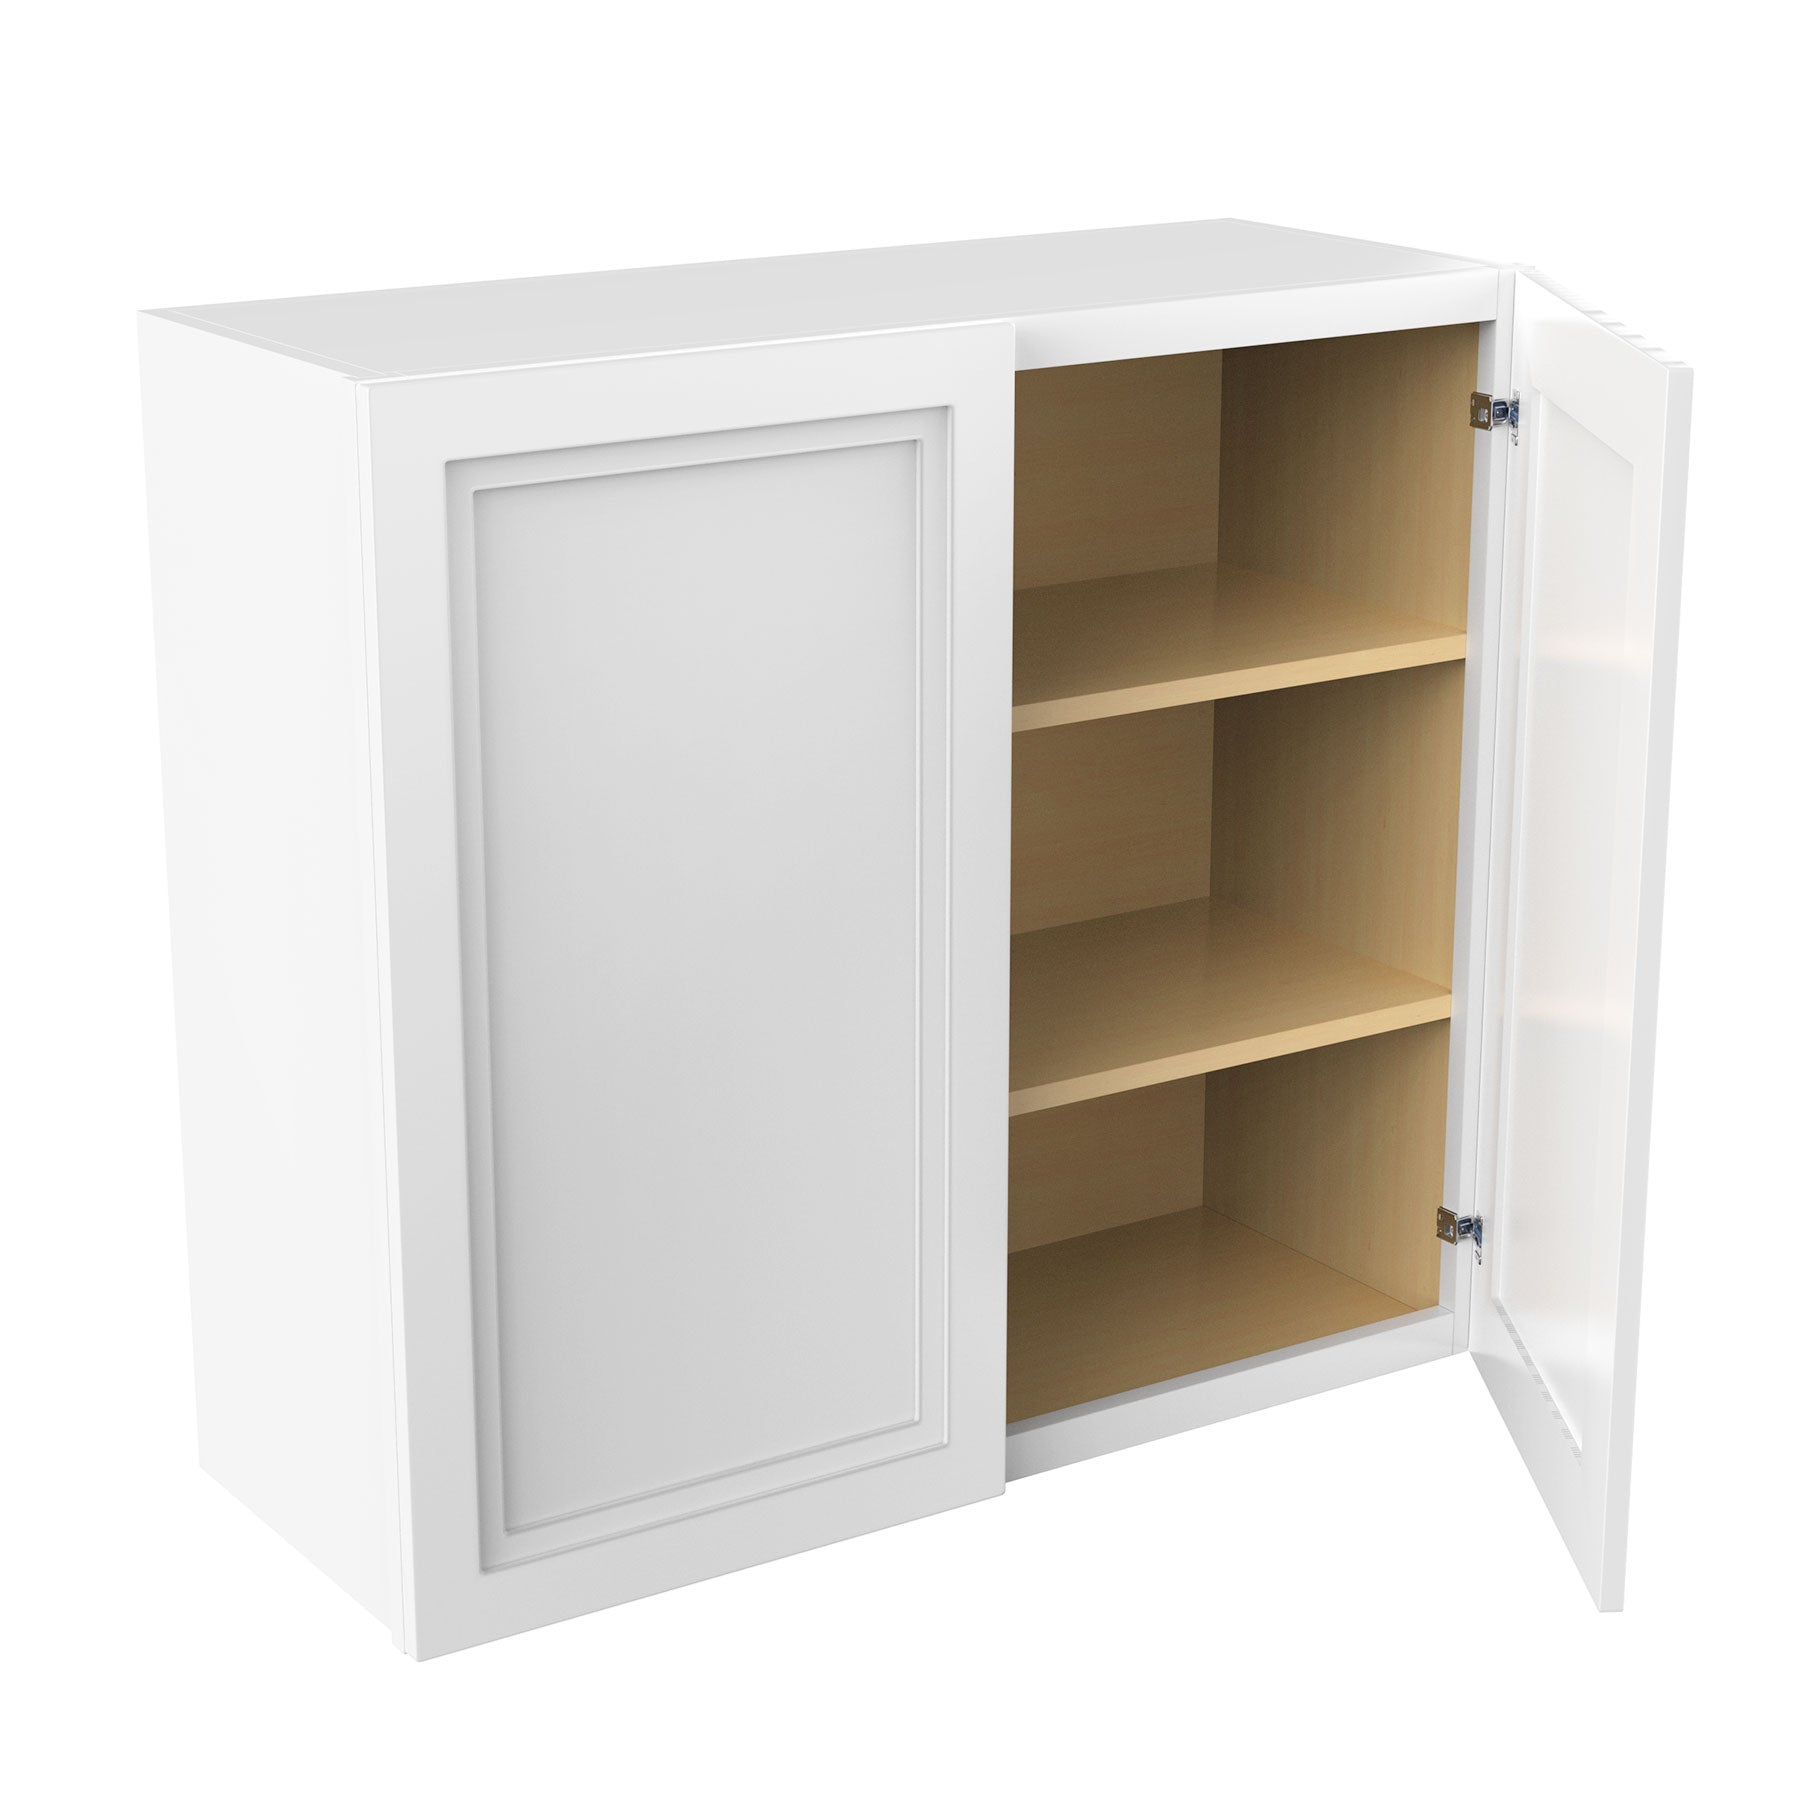 RTA - Fashion White - 30" High Double Door Wall Cabinet | 33"W x 30"H x 12"D